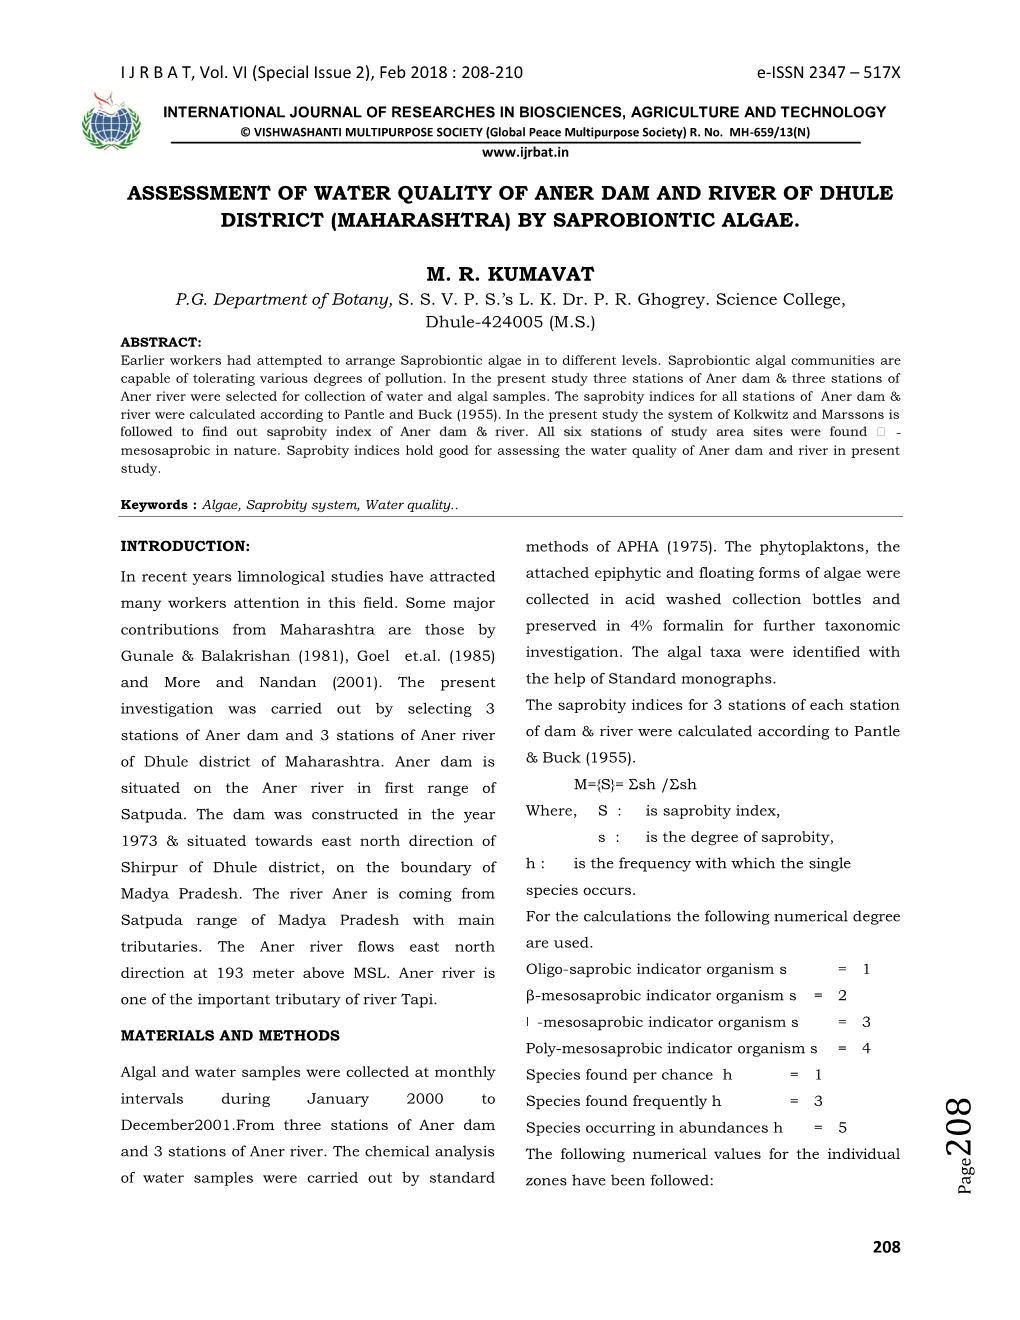 Assessment of Water Quality of Aner Dam and River of Dhule District (Maharashtra) by Saprobiontic Algae